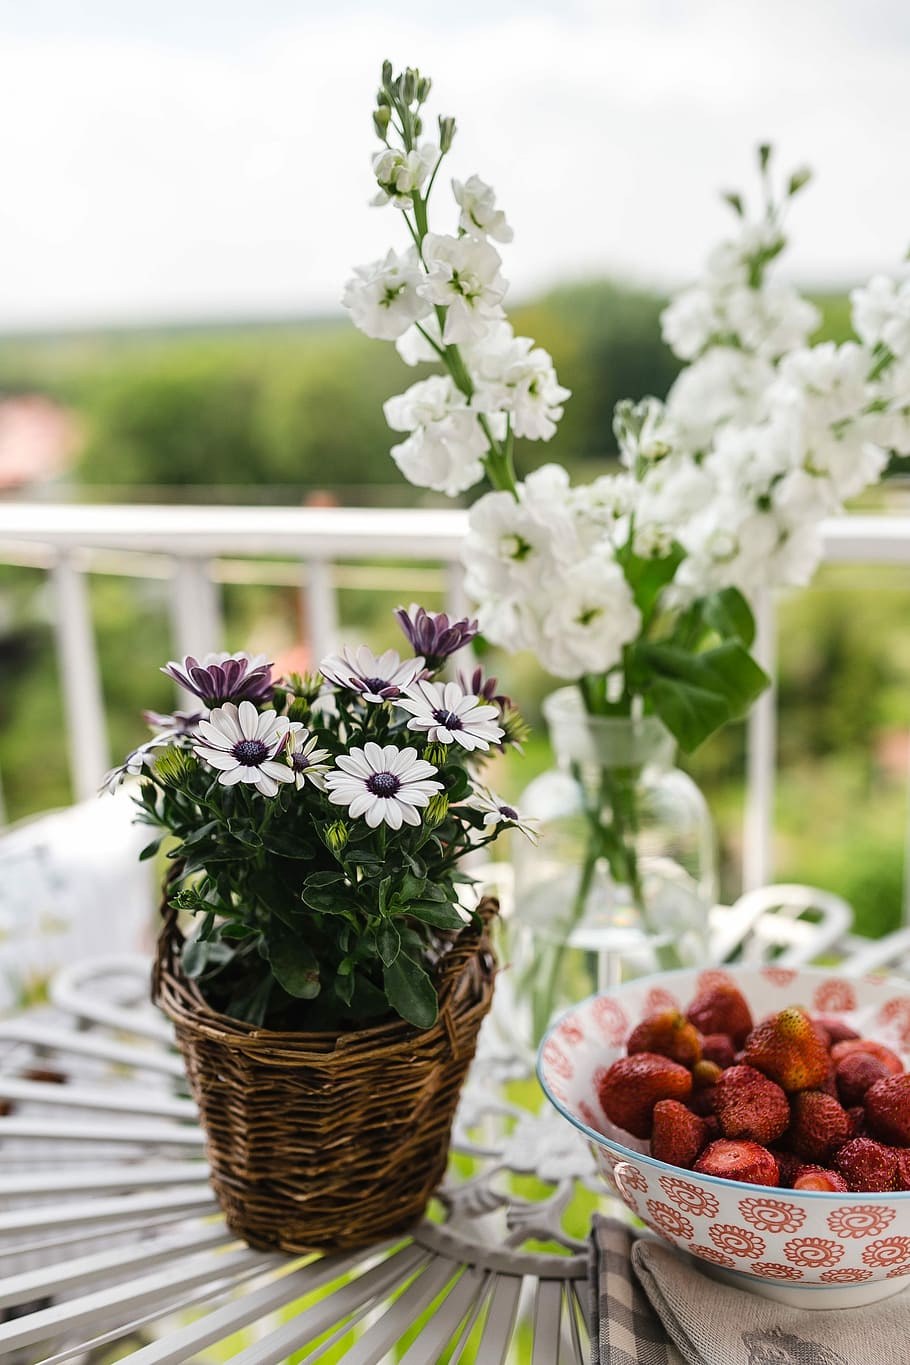 Country-style Balcony Decorations, summer, garden, resting, relax